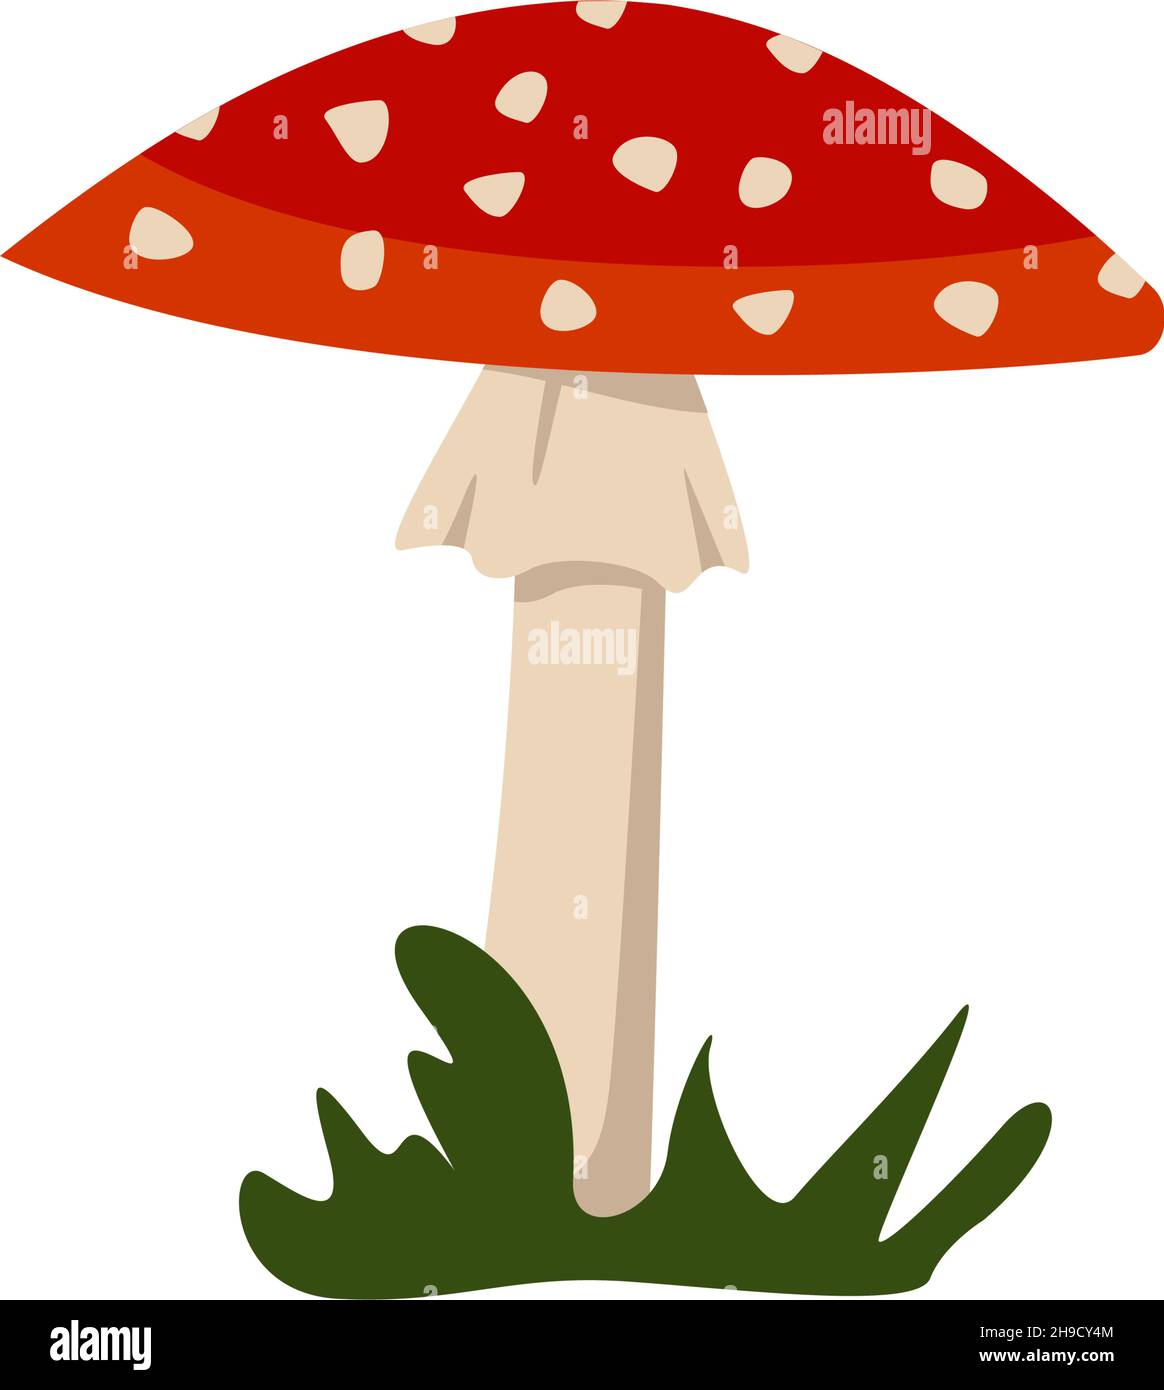 Amanita mushrooms with red caps and white spots. Stock Vector